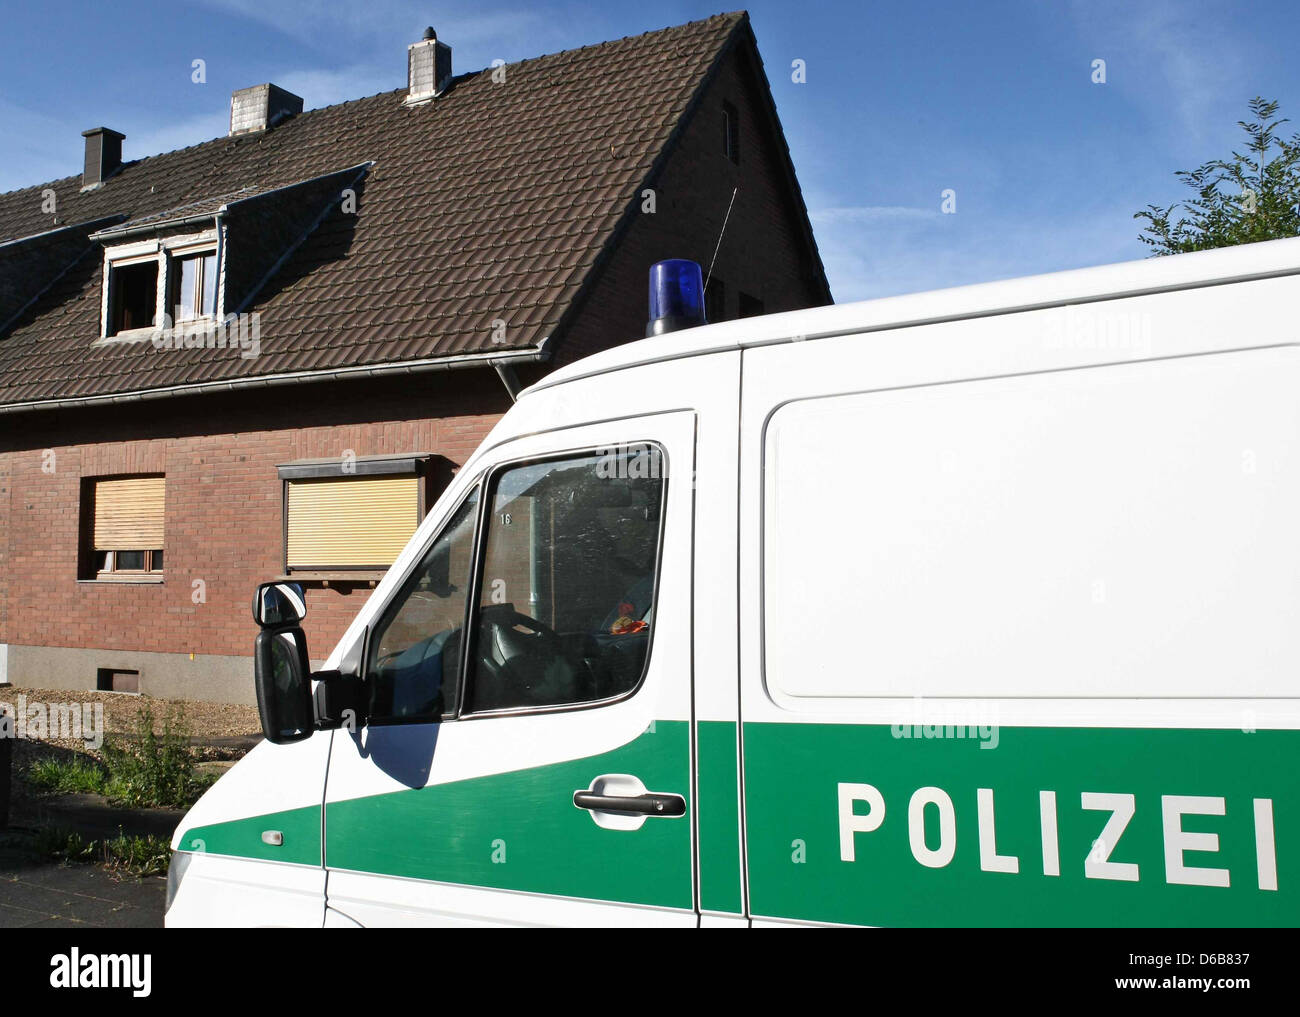 A police vehicle is parked outside during a house search of right-wing extremist organization 'Kameradschaft Aachener Land' in Juelich, Germany, 23 August 2012. Police were out in force after the North Rhine-Westphalian Interior Minister outlawed three right-wing extremist organizations, the 'Kameradschaft Aachener Land', the 'Nationaler Widerstand Dortmund' and the 'Kameradschaft  Stock Photo